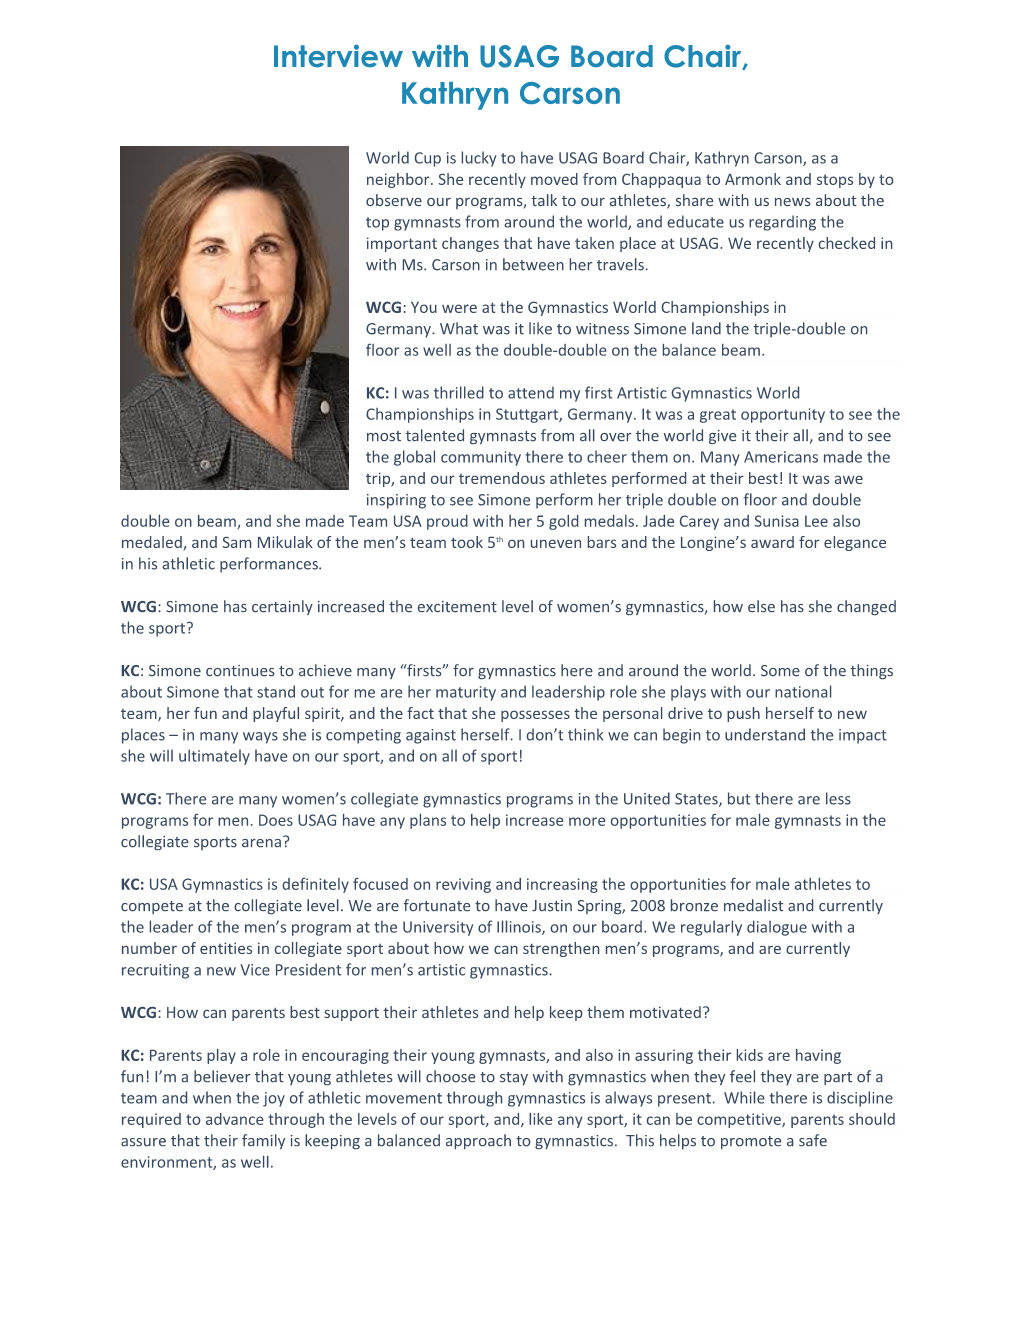 Interview with USAG Board Chair, Kathryn Carson